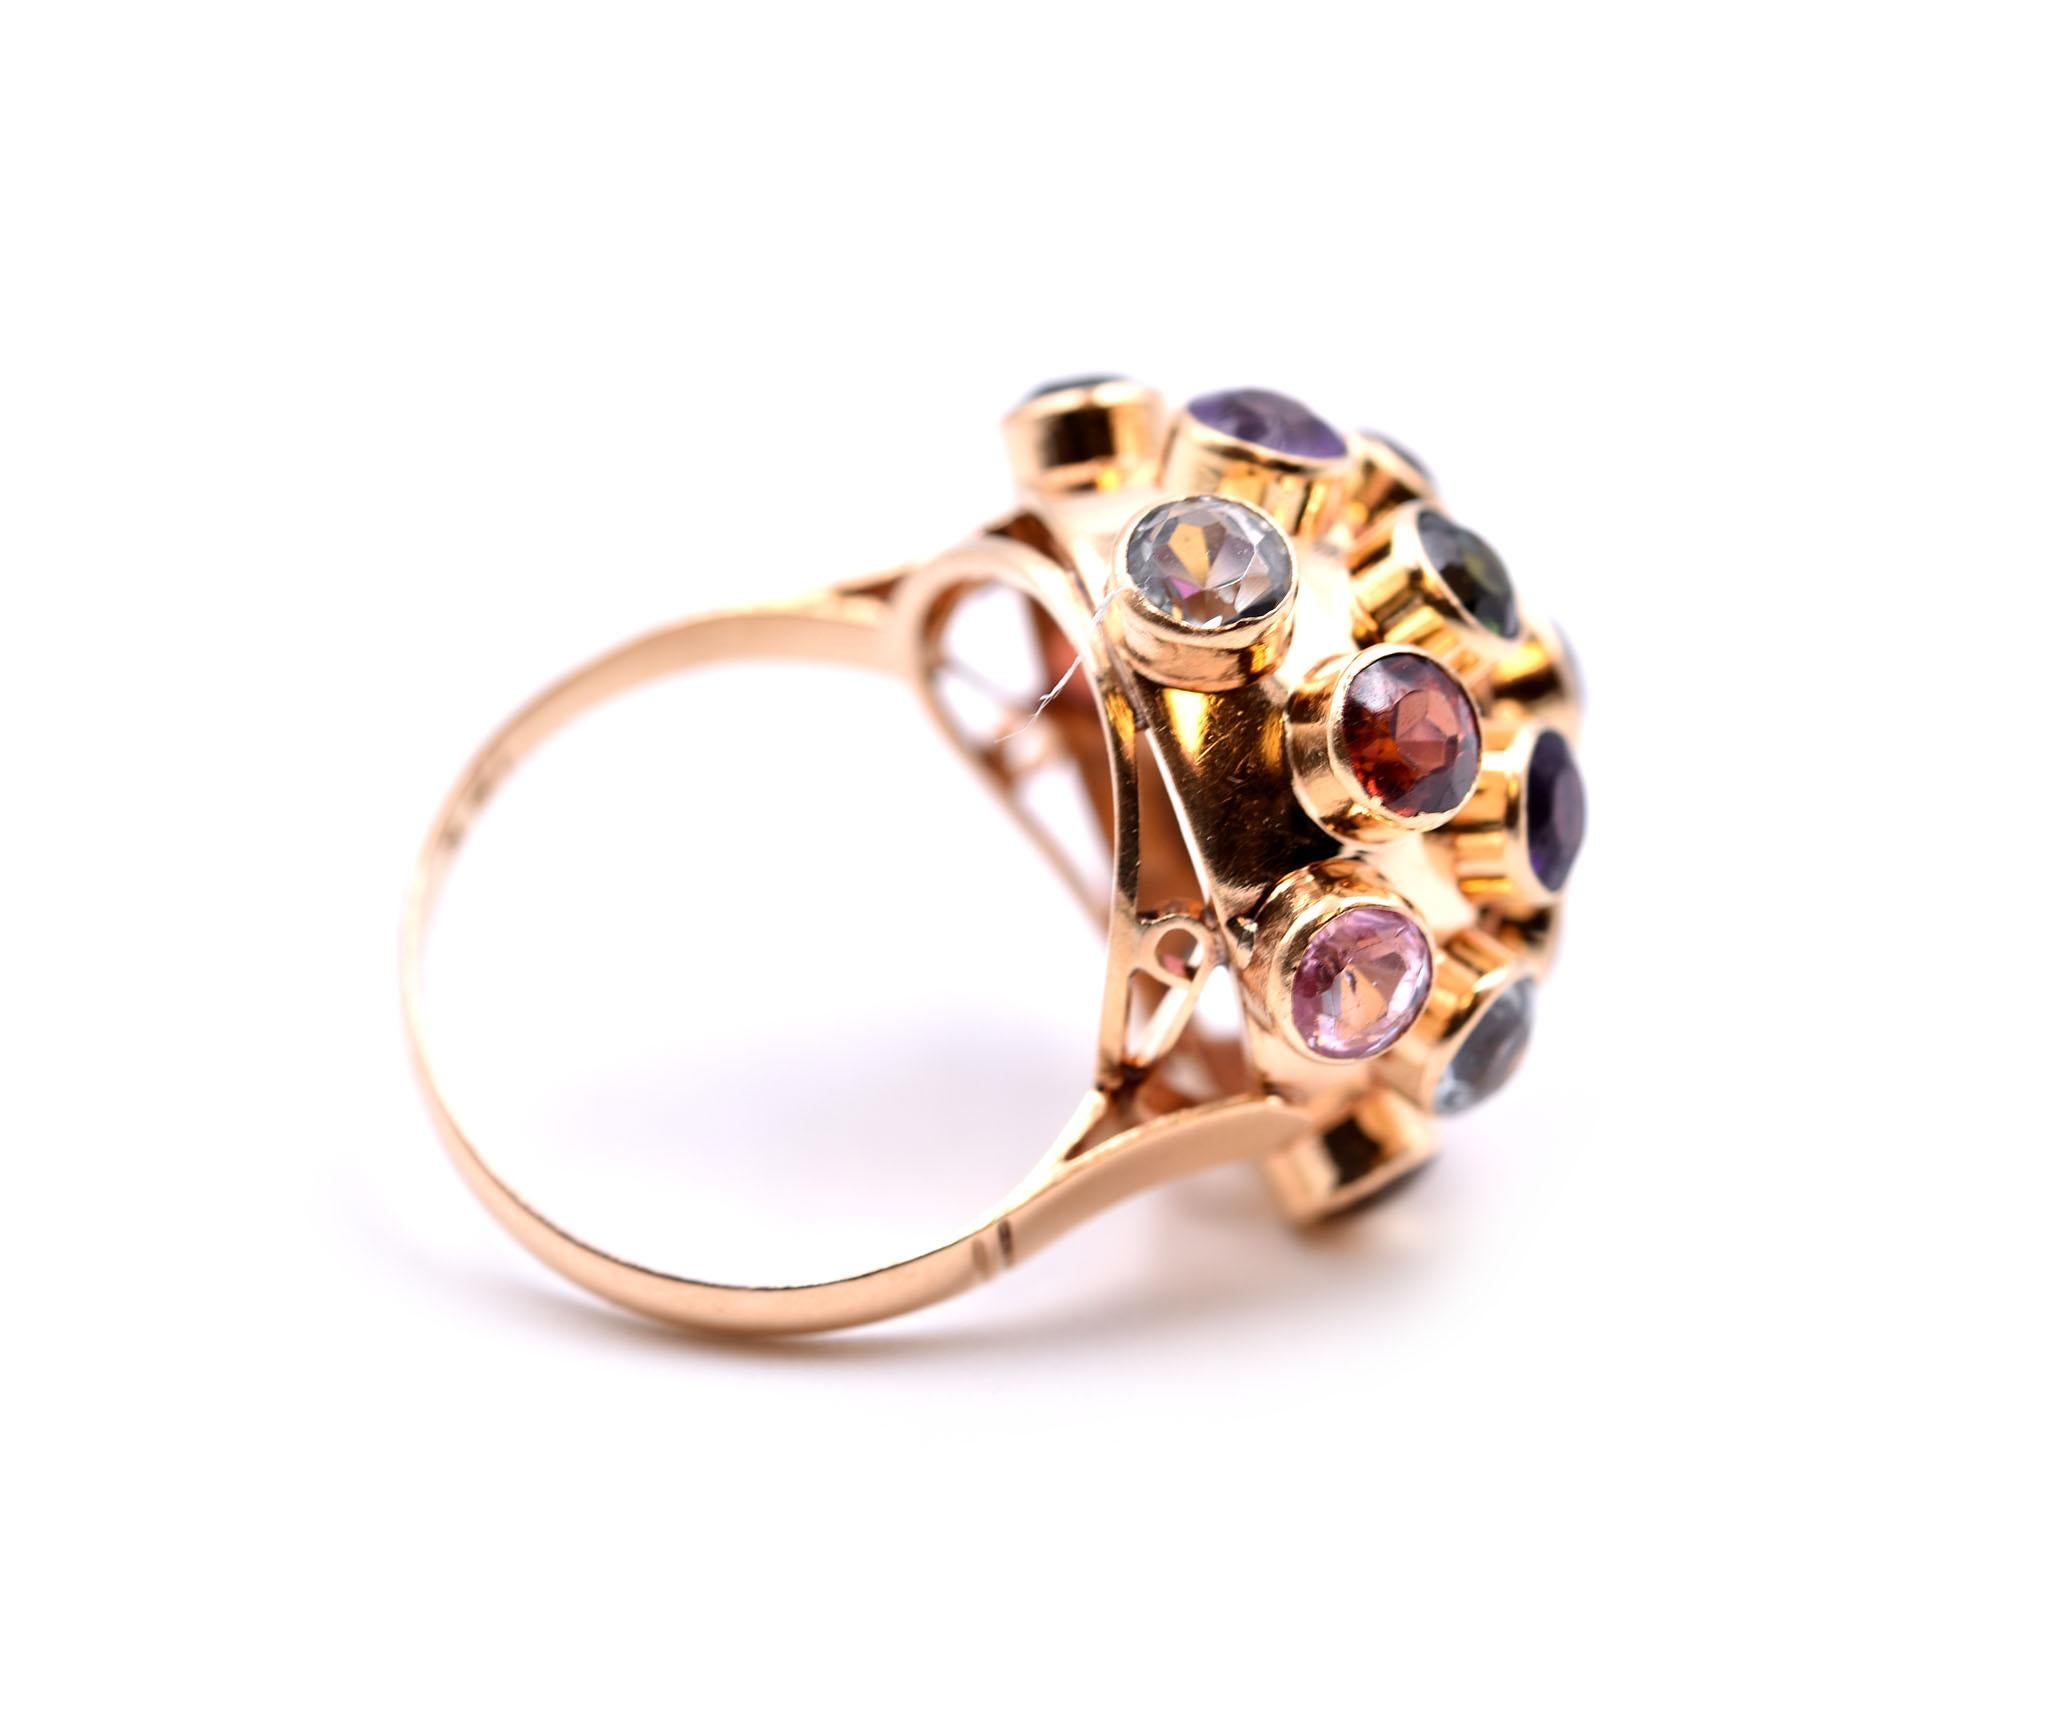 Designer: custom design
Material: 18k yellow gold
Gemstones: citrine, amethyst, garnet, blue topaz, green tourmaline and pink tourmaline
Ring size: 5 ½ (please allow two additional shipping days for sizing requests)
Dimensions: ring measures 14.37mm